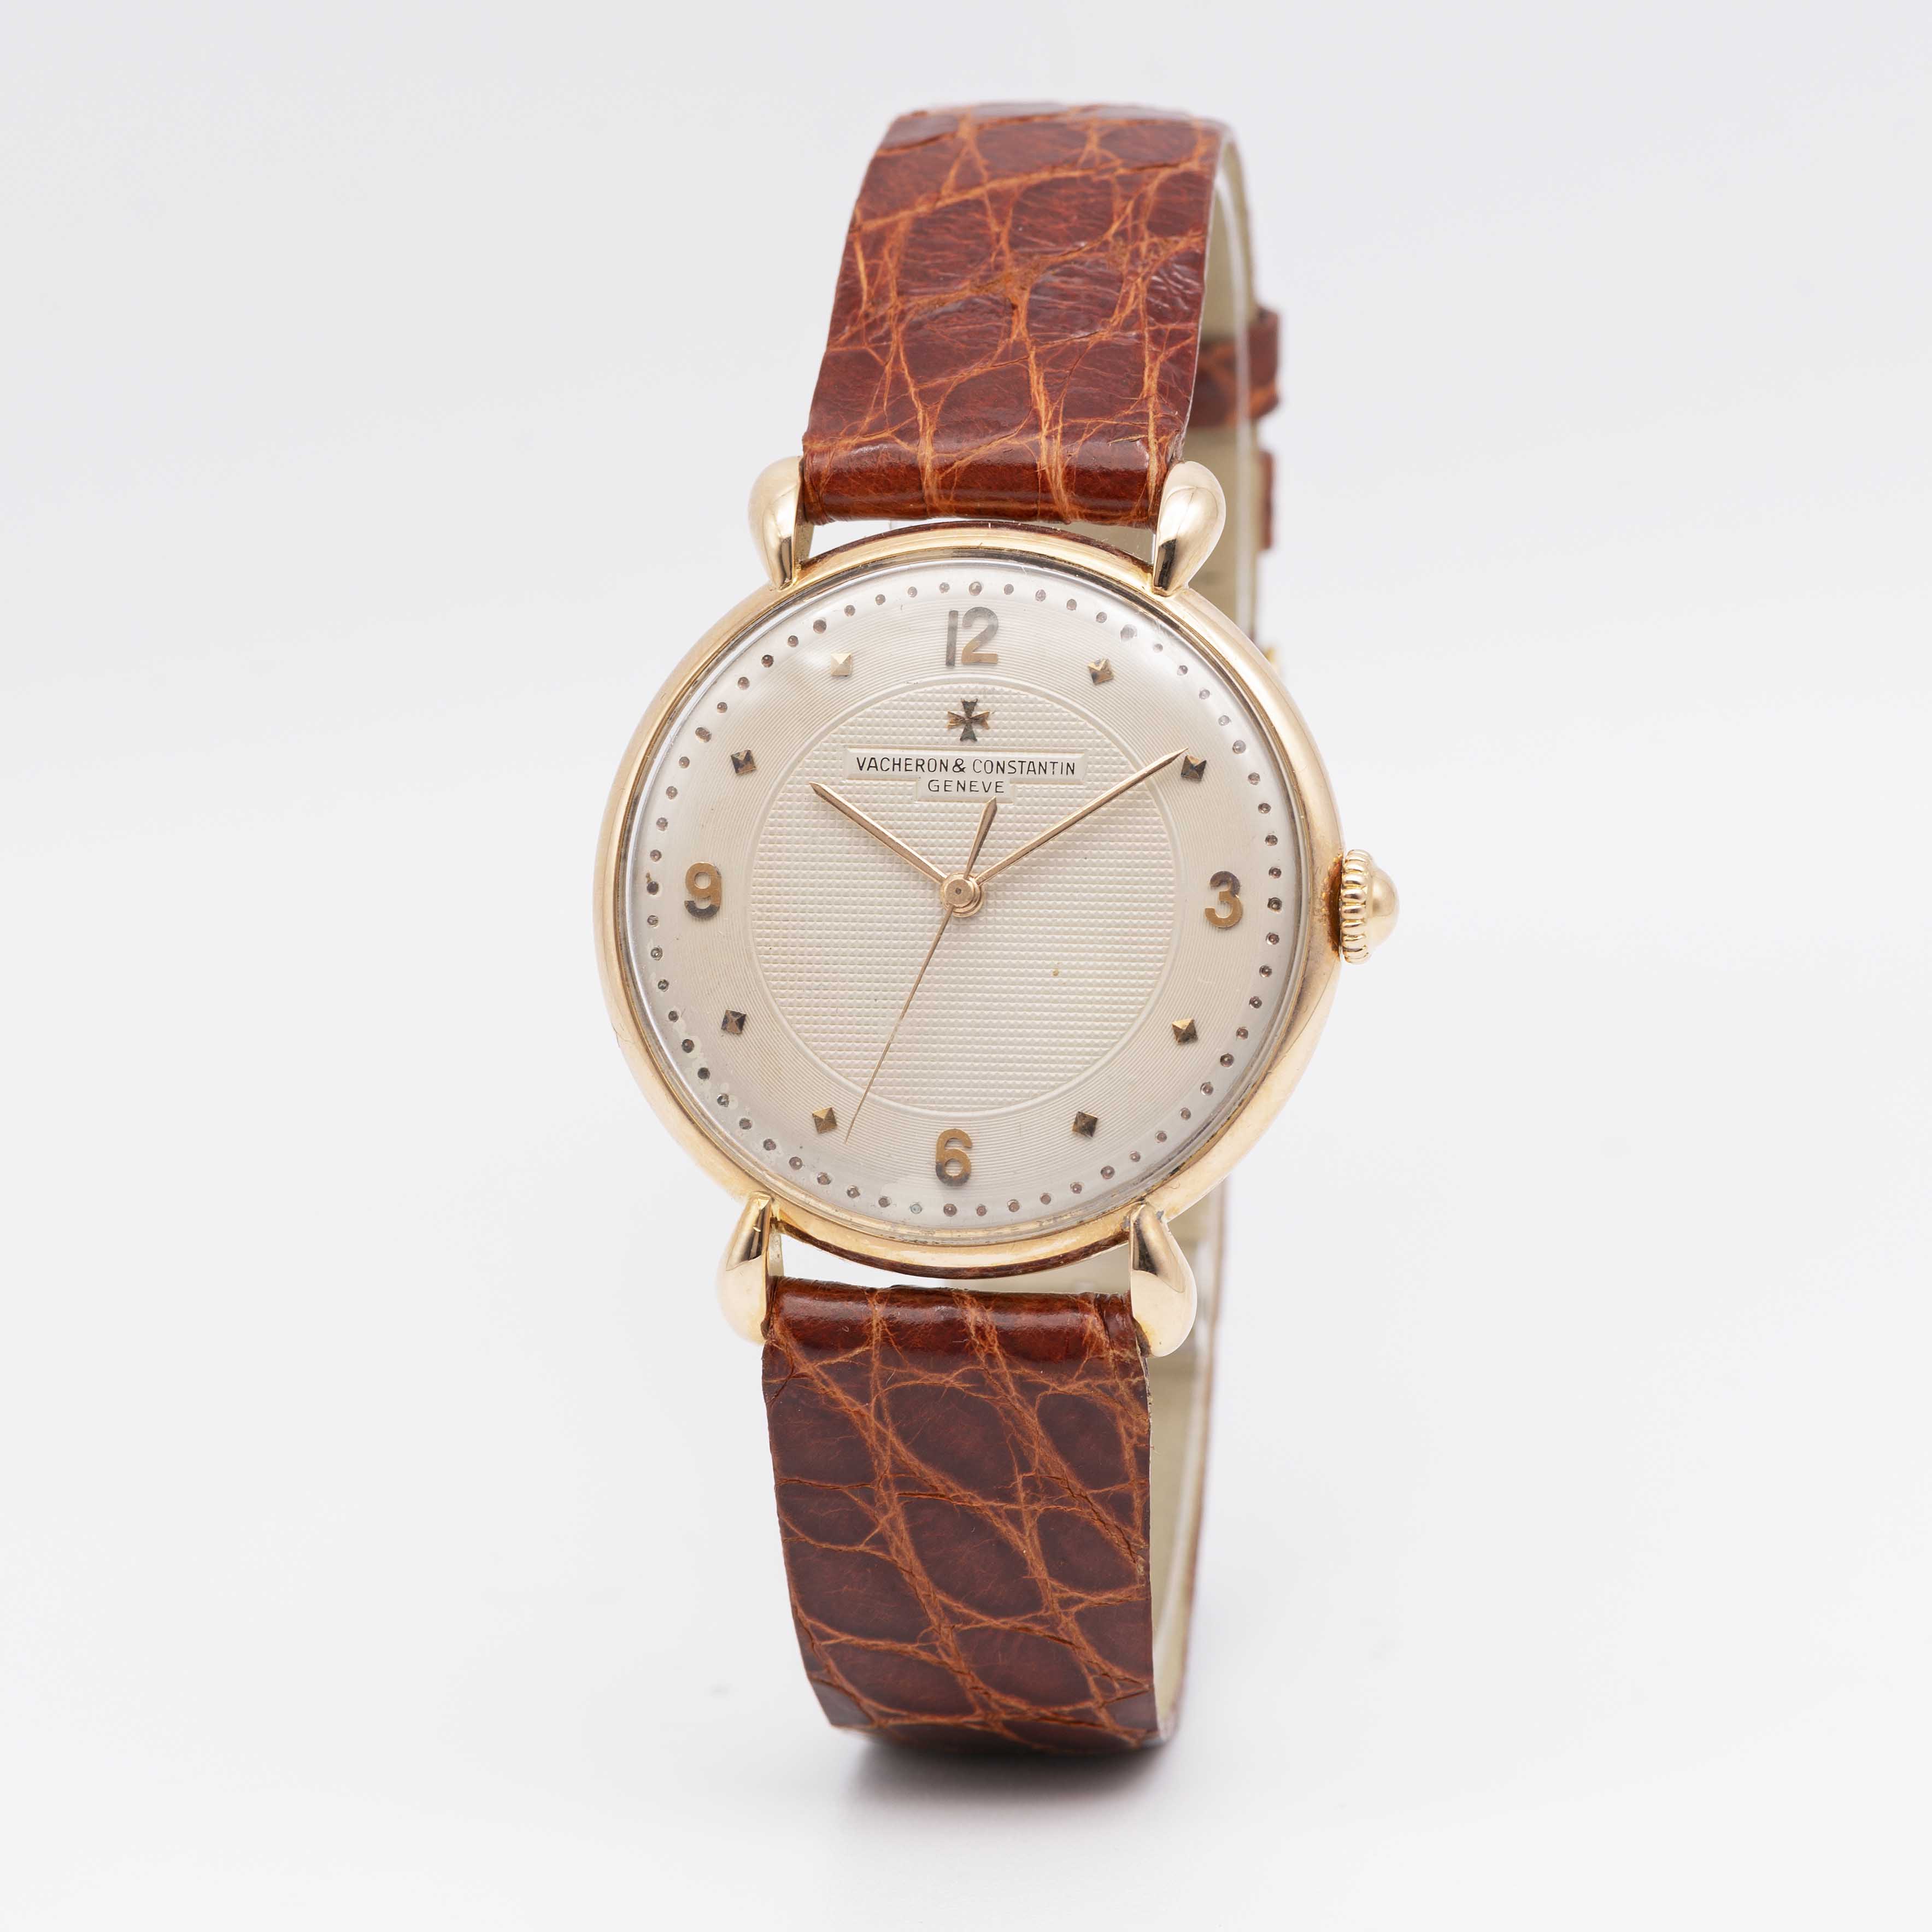 A GENTLEMAN'S 18K SOLID ROSE GOLD VACHERON & CONSTANTIN WRIST WATCH CIRCA 1950s, WITH GUILLOCHE DIAL - Image 3 of 8